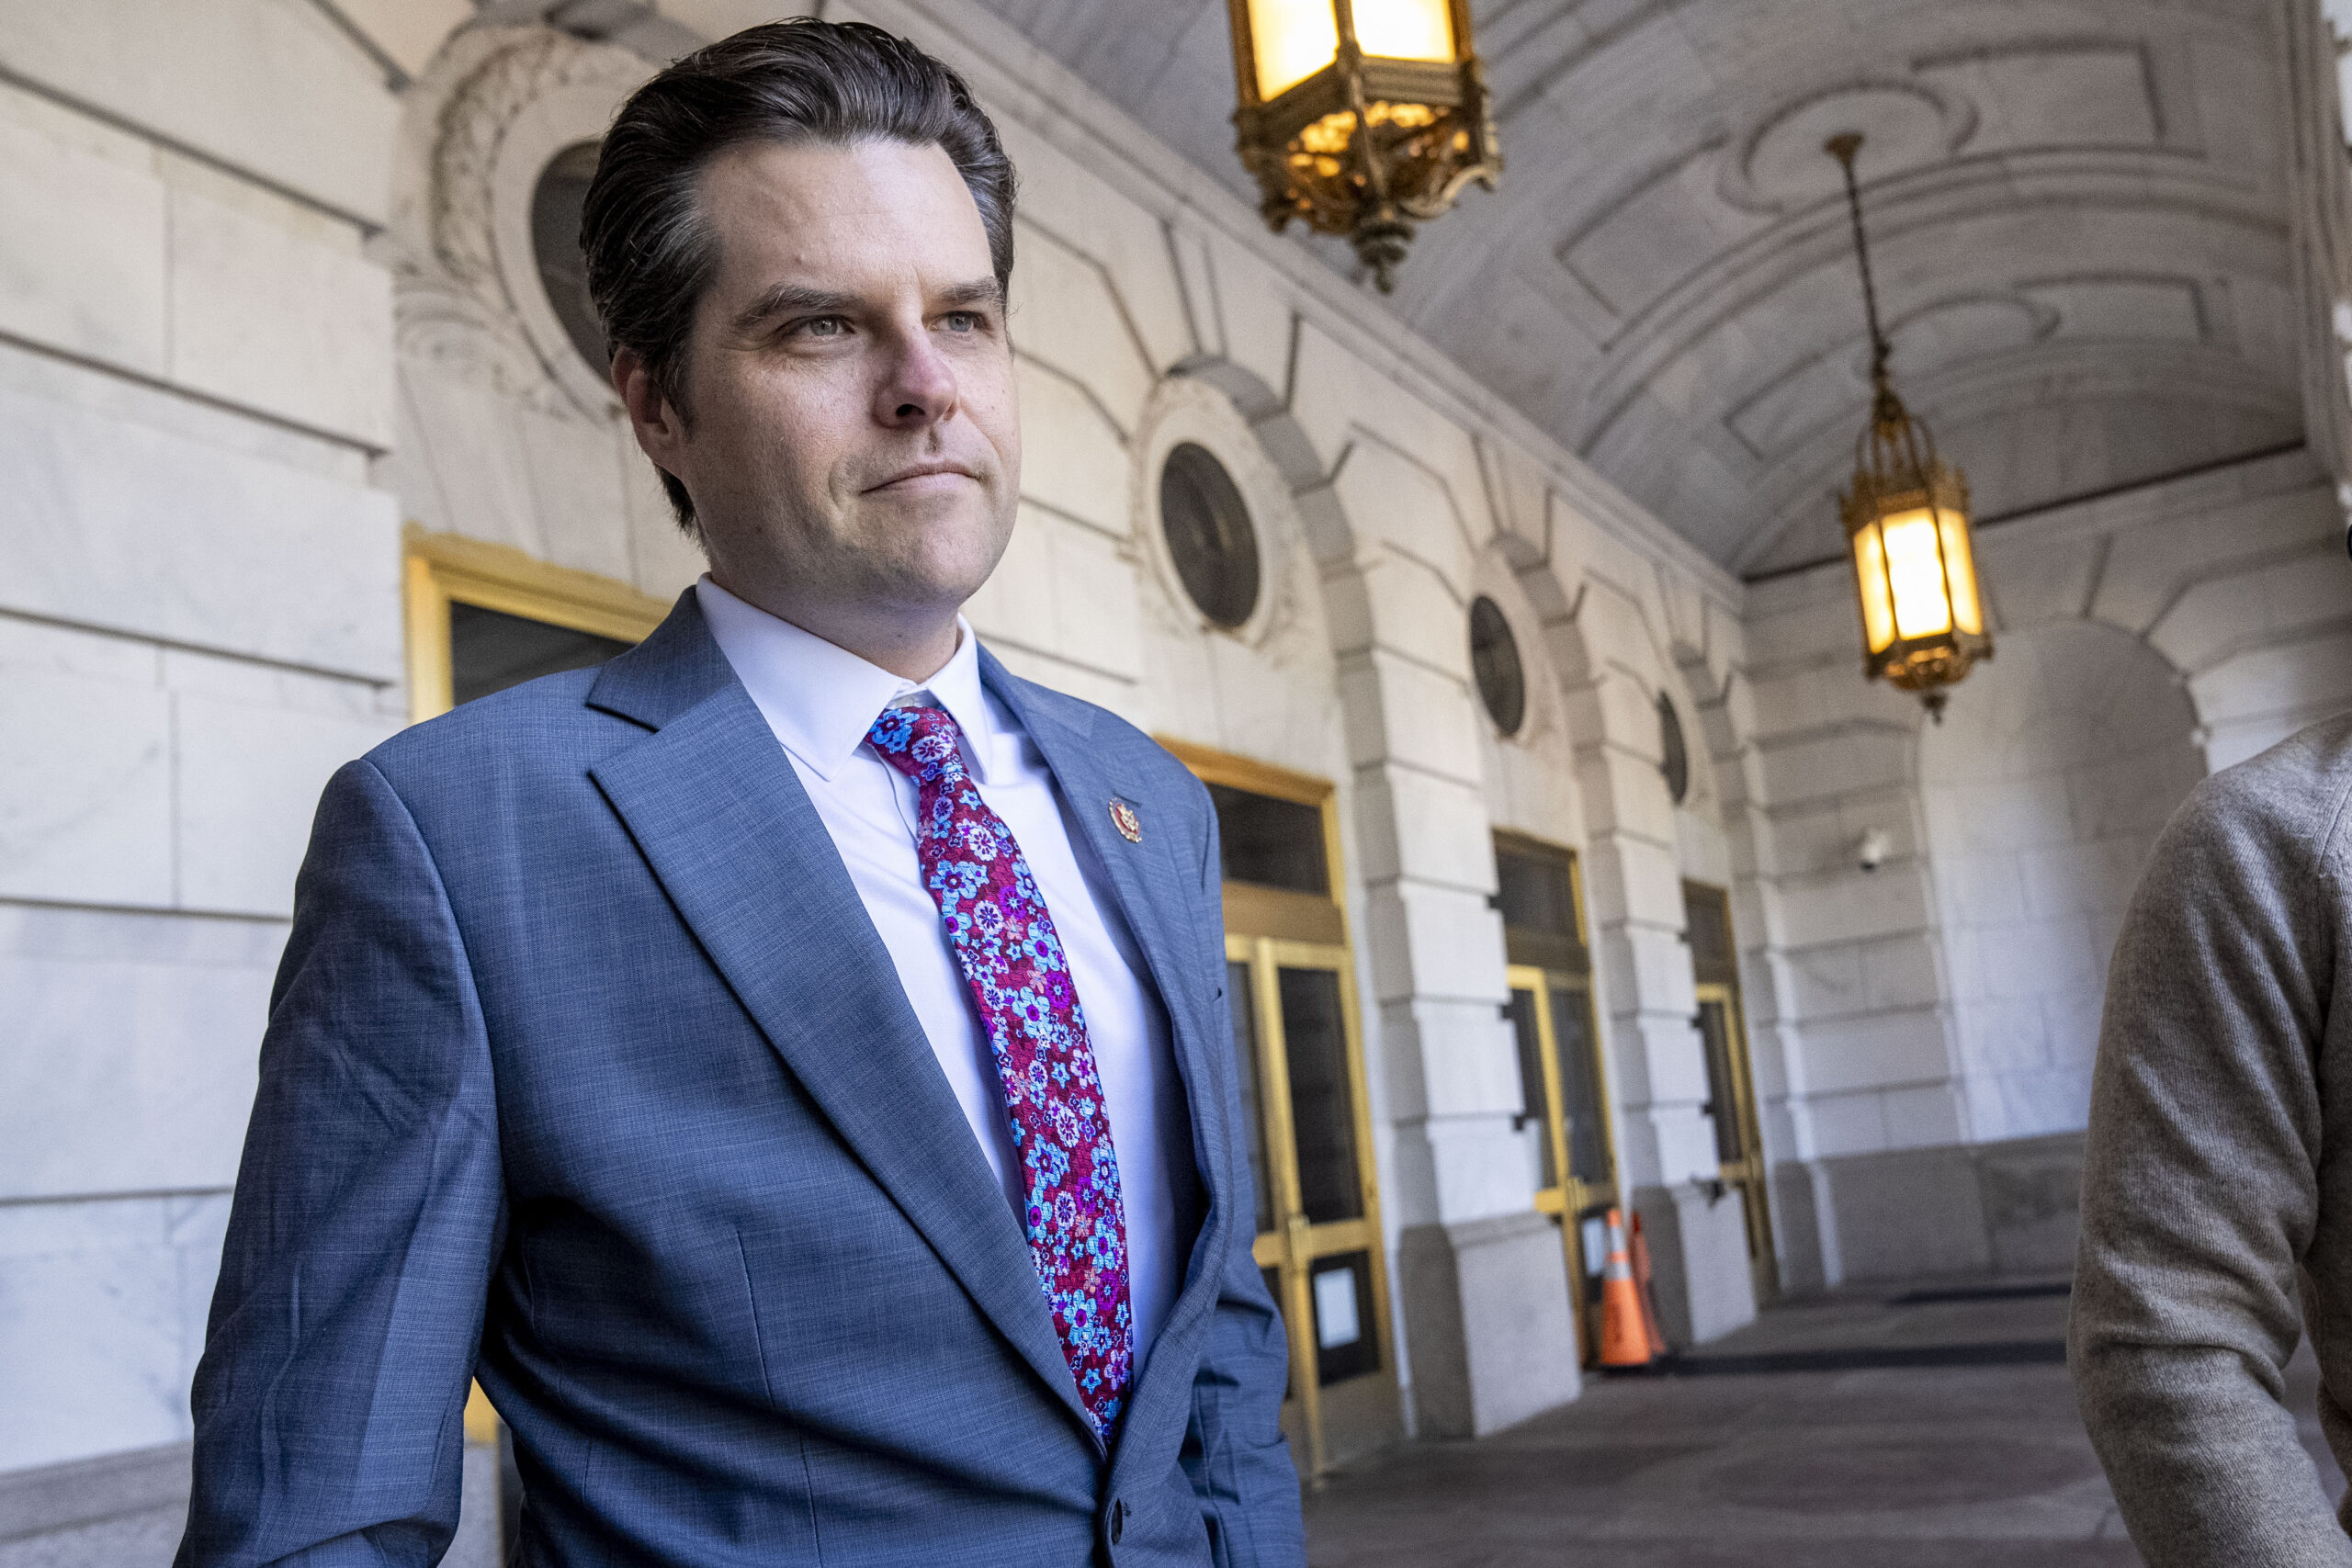 Gaetz presses EPA on regulating water filters as pesticides [Video]